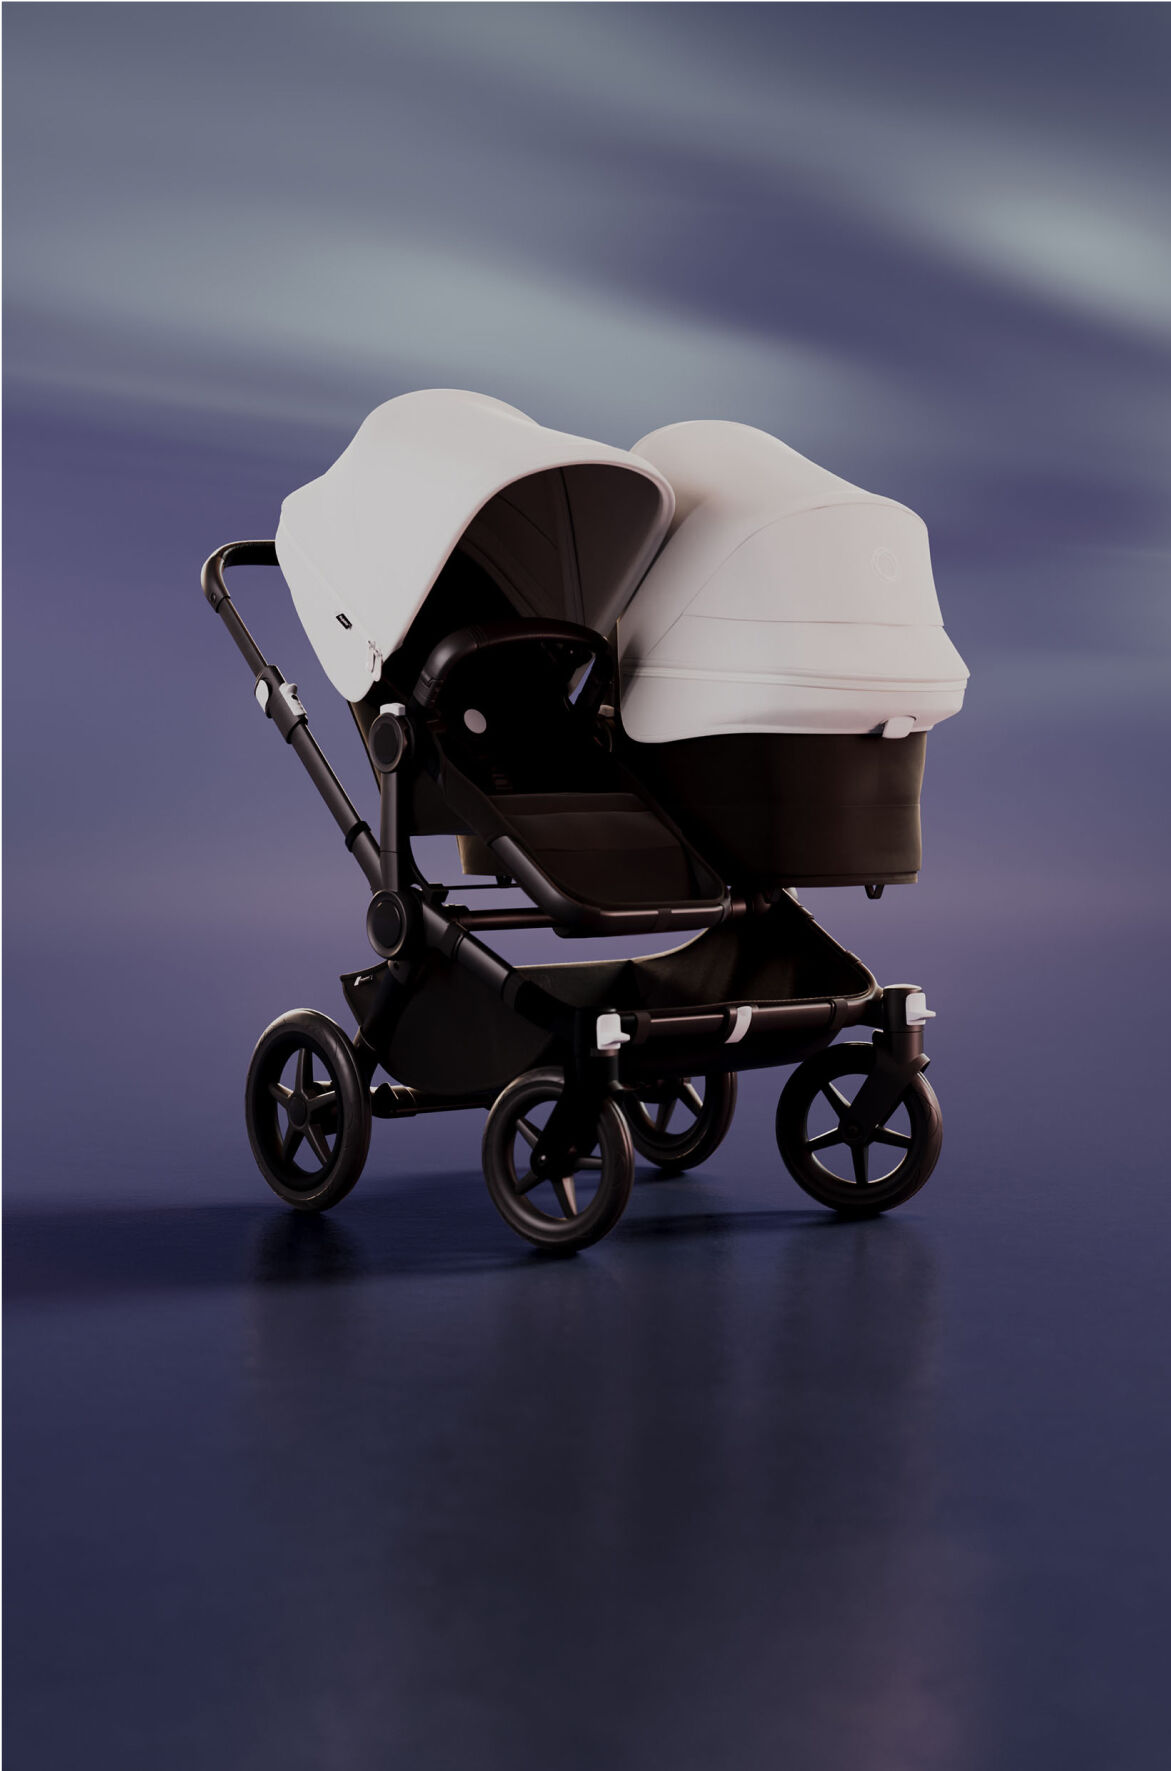 A Bugaboo Donkey 5 Duo pram with a seat and a bassinet. The sun canopy is in Misty White. The background is blue with streaks of white.